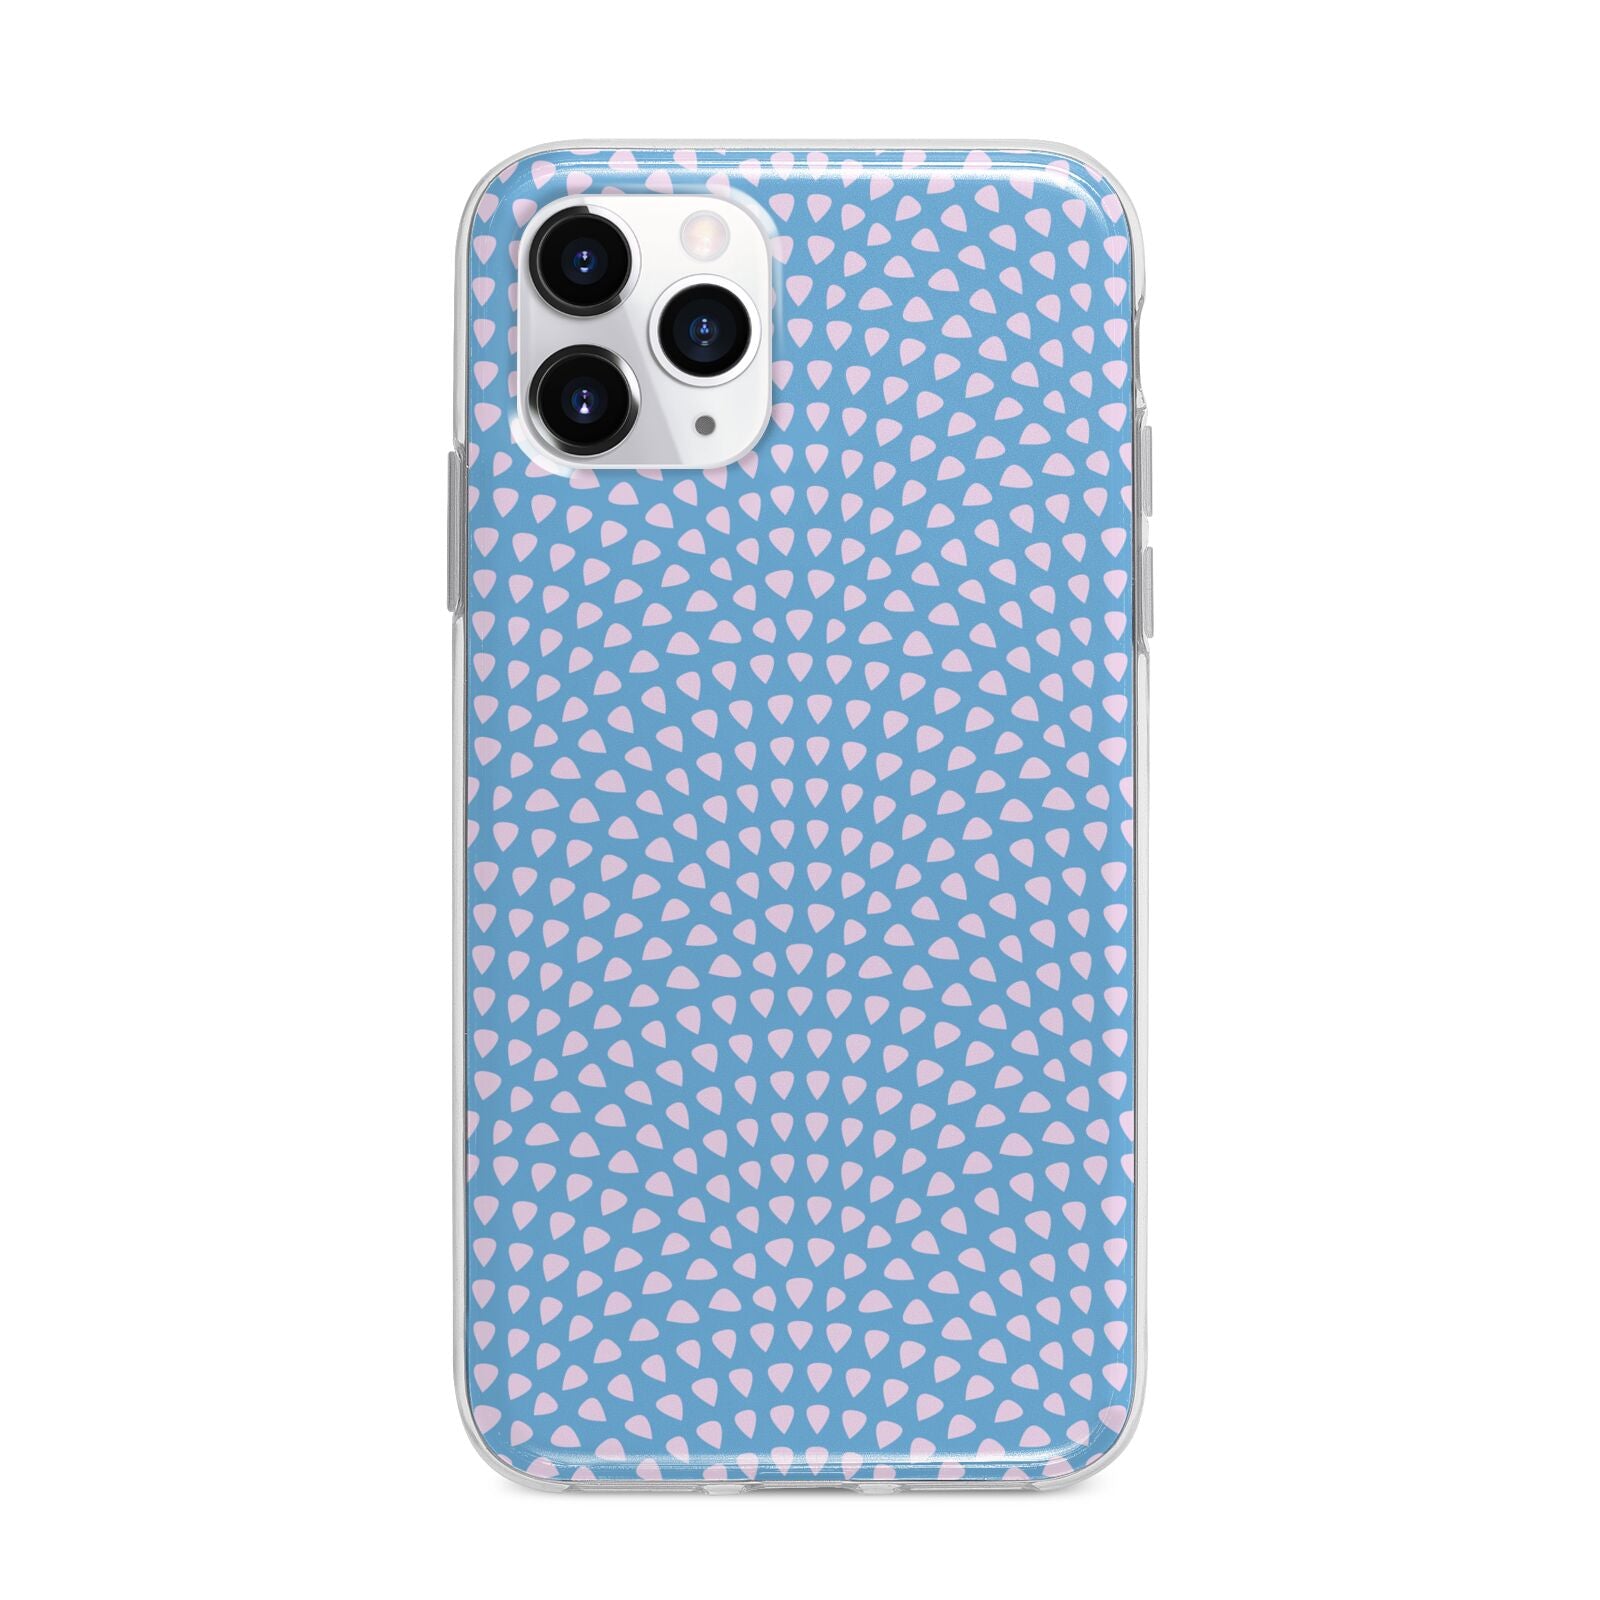 Coastal Pattern Apple iPhone 11 Pro Max in Silver with Bumper Case